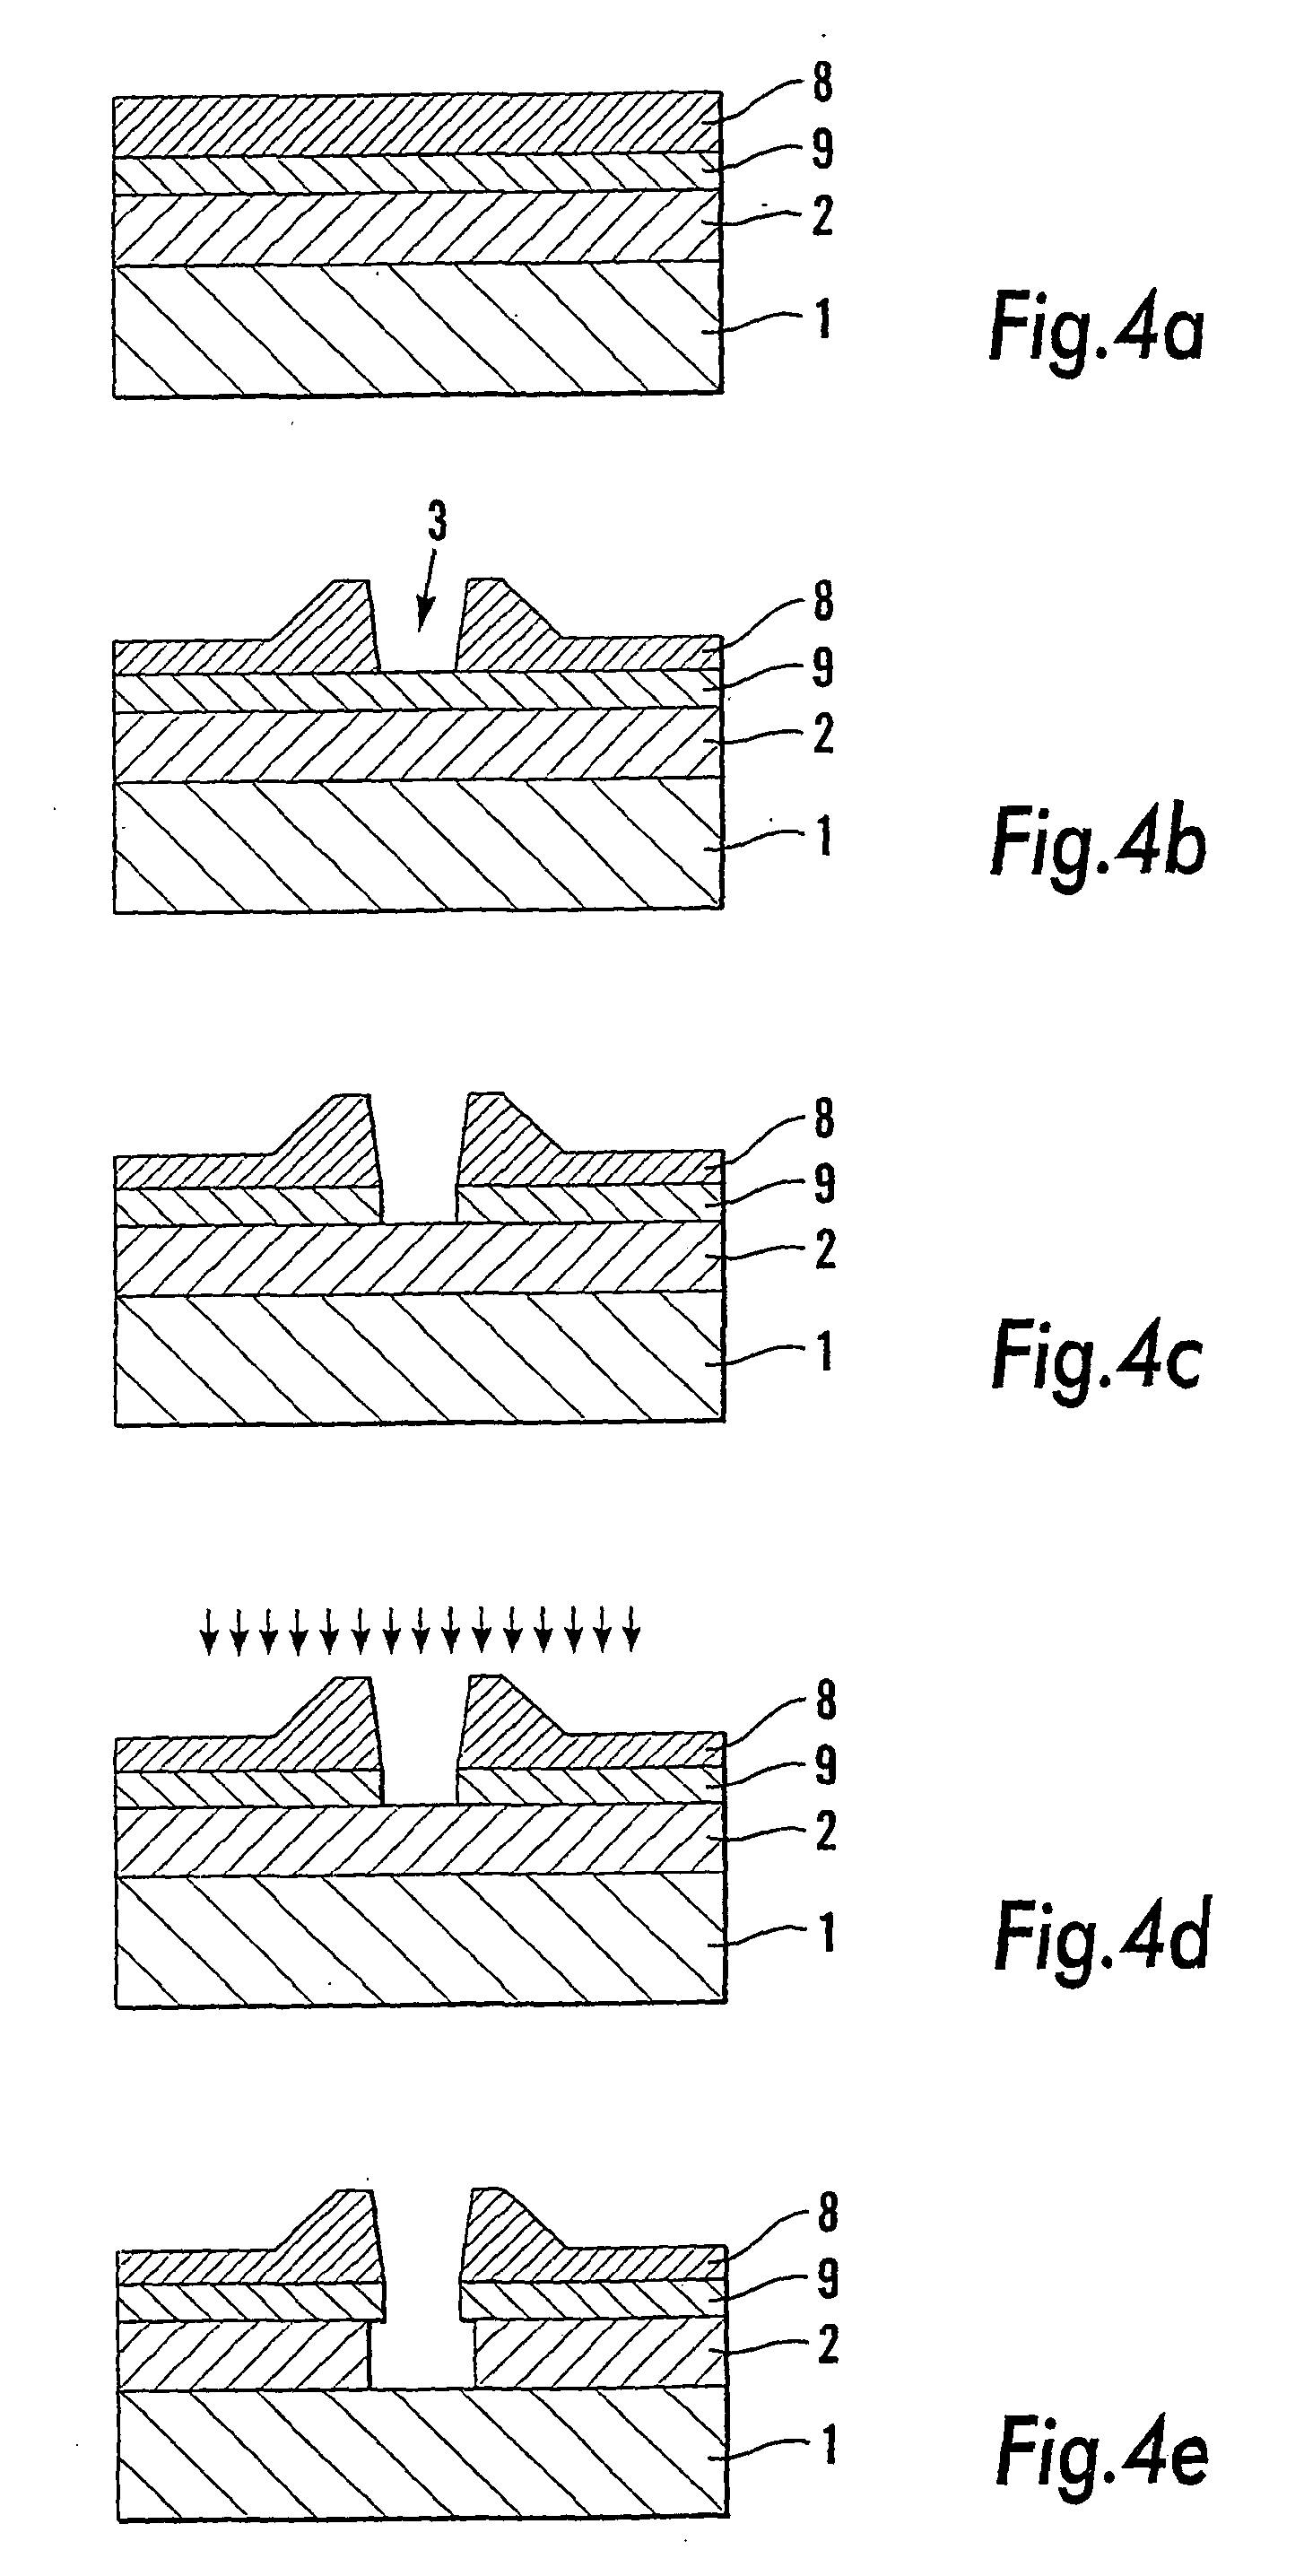 Substrate for and a process in connection with the product of structures